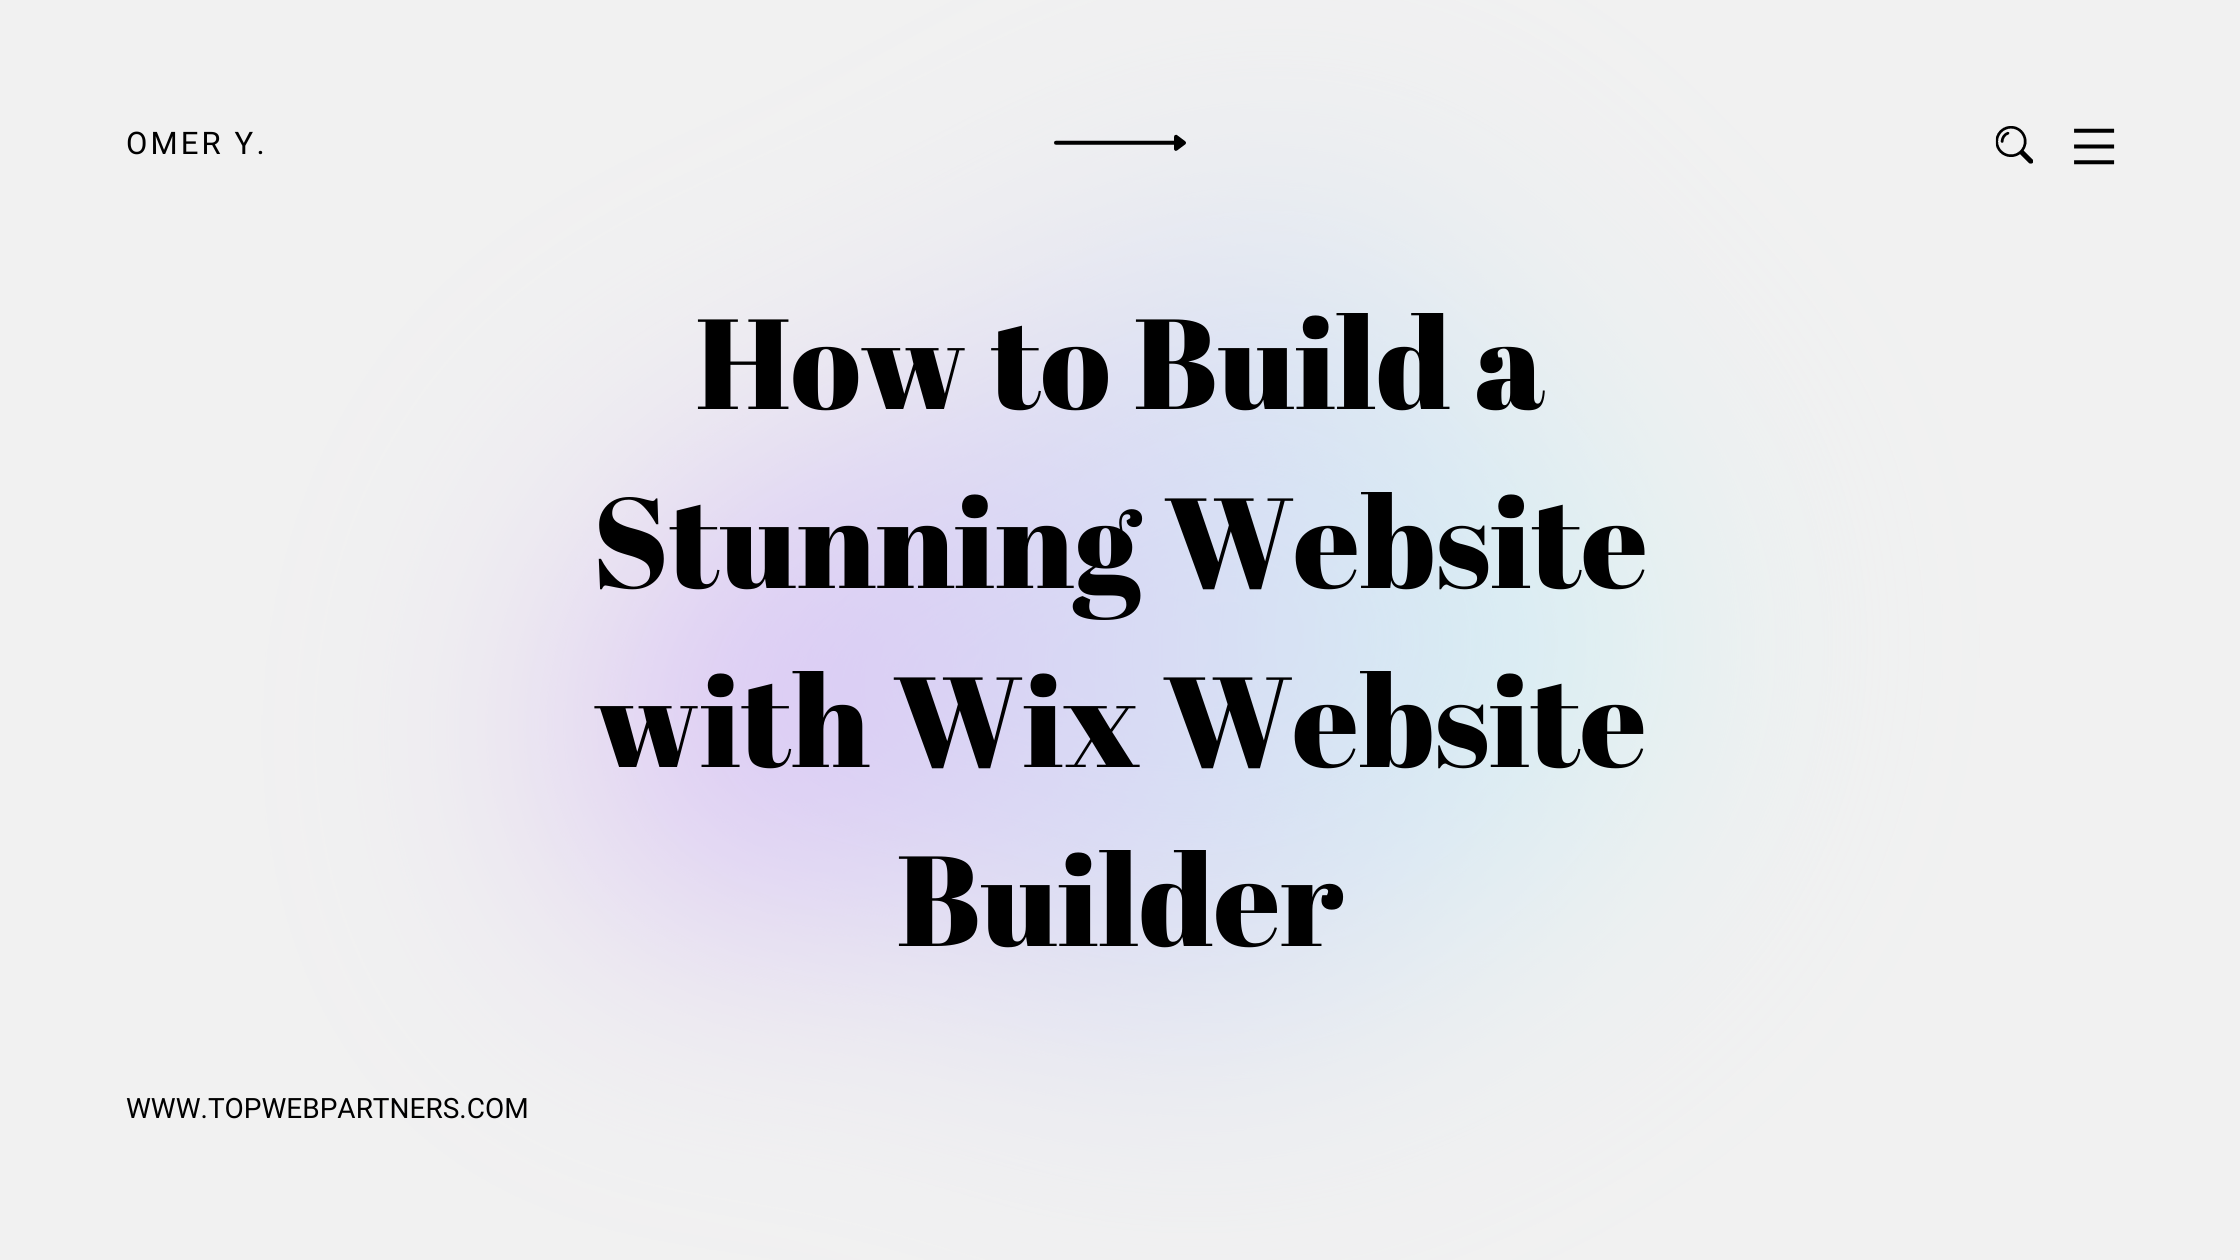 How to Build a Stunning Website with Wix Website Builder